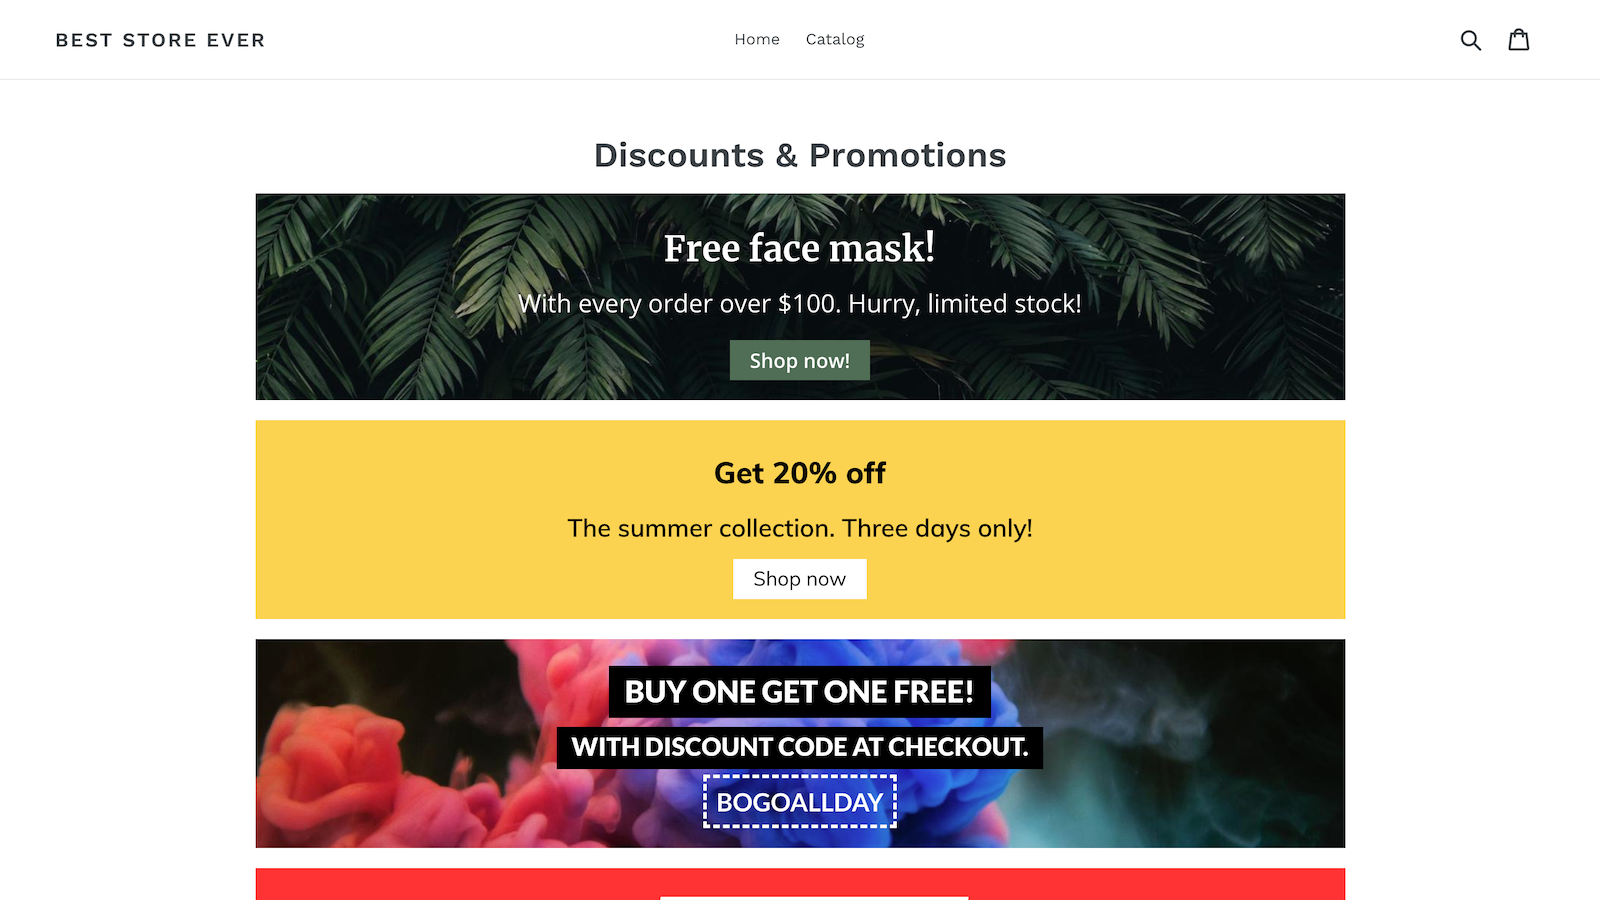 Easy Discounts & Promotions in an online store